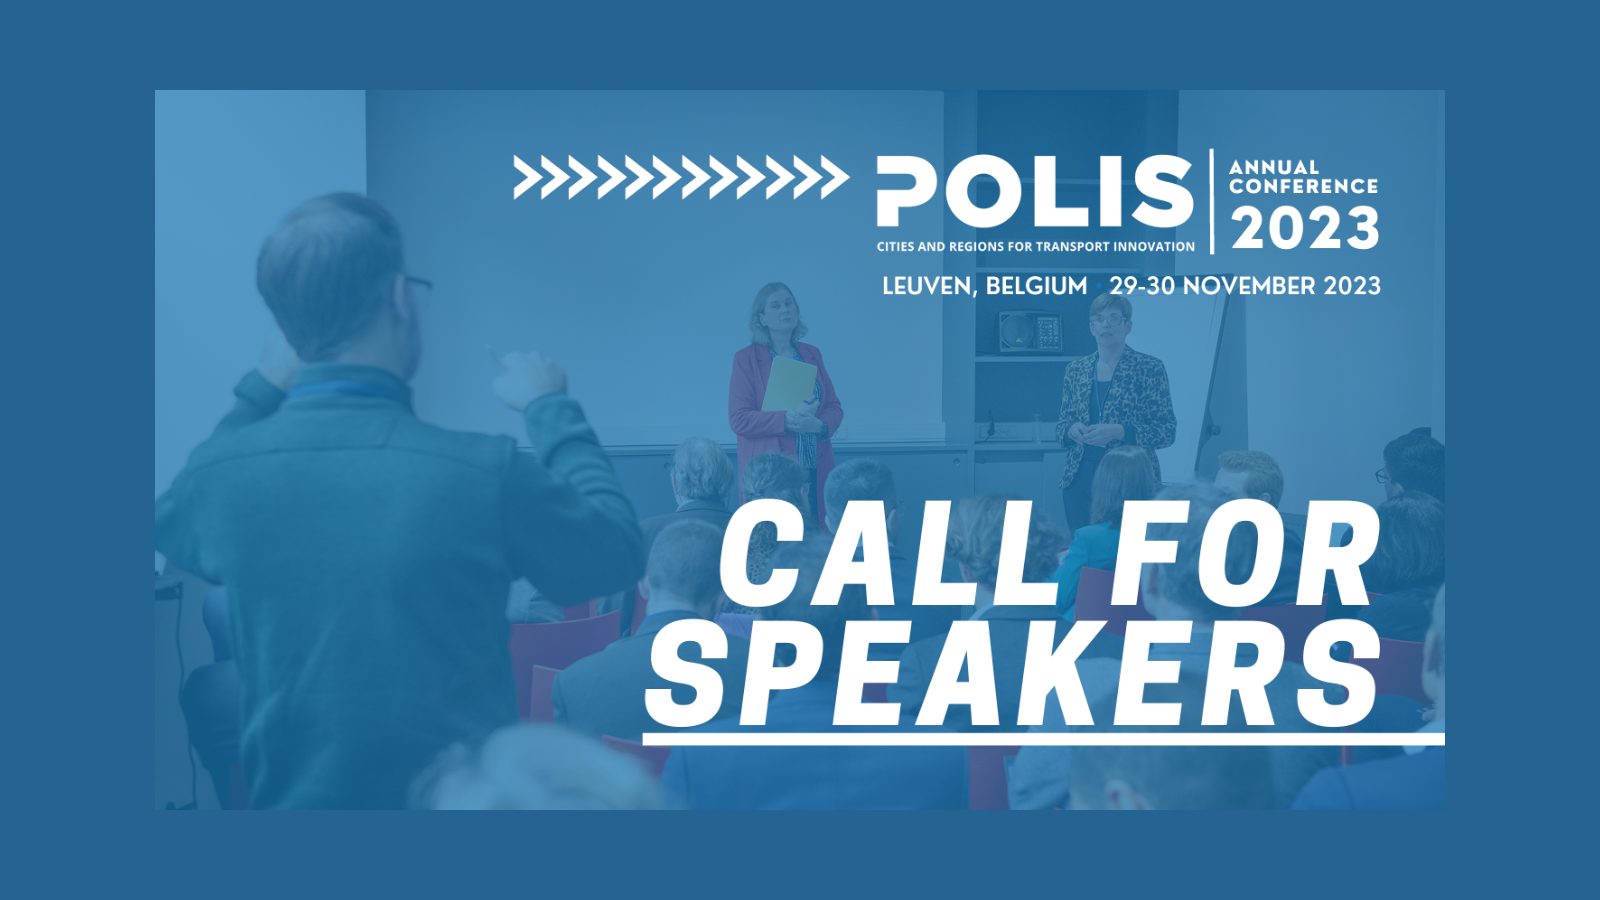 Become a Speaker at the Annual POLIS Conference 2023!